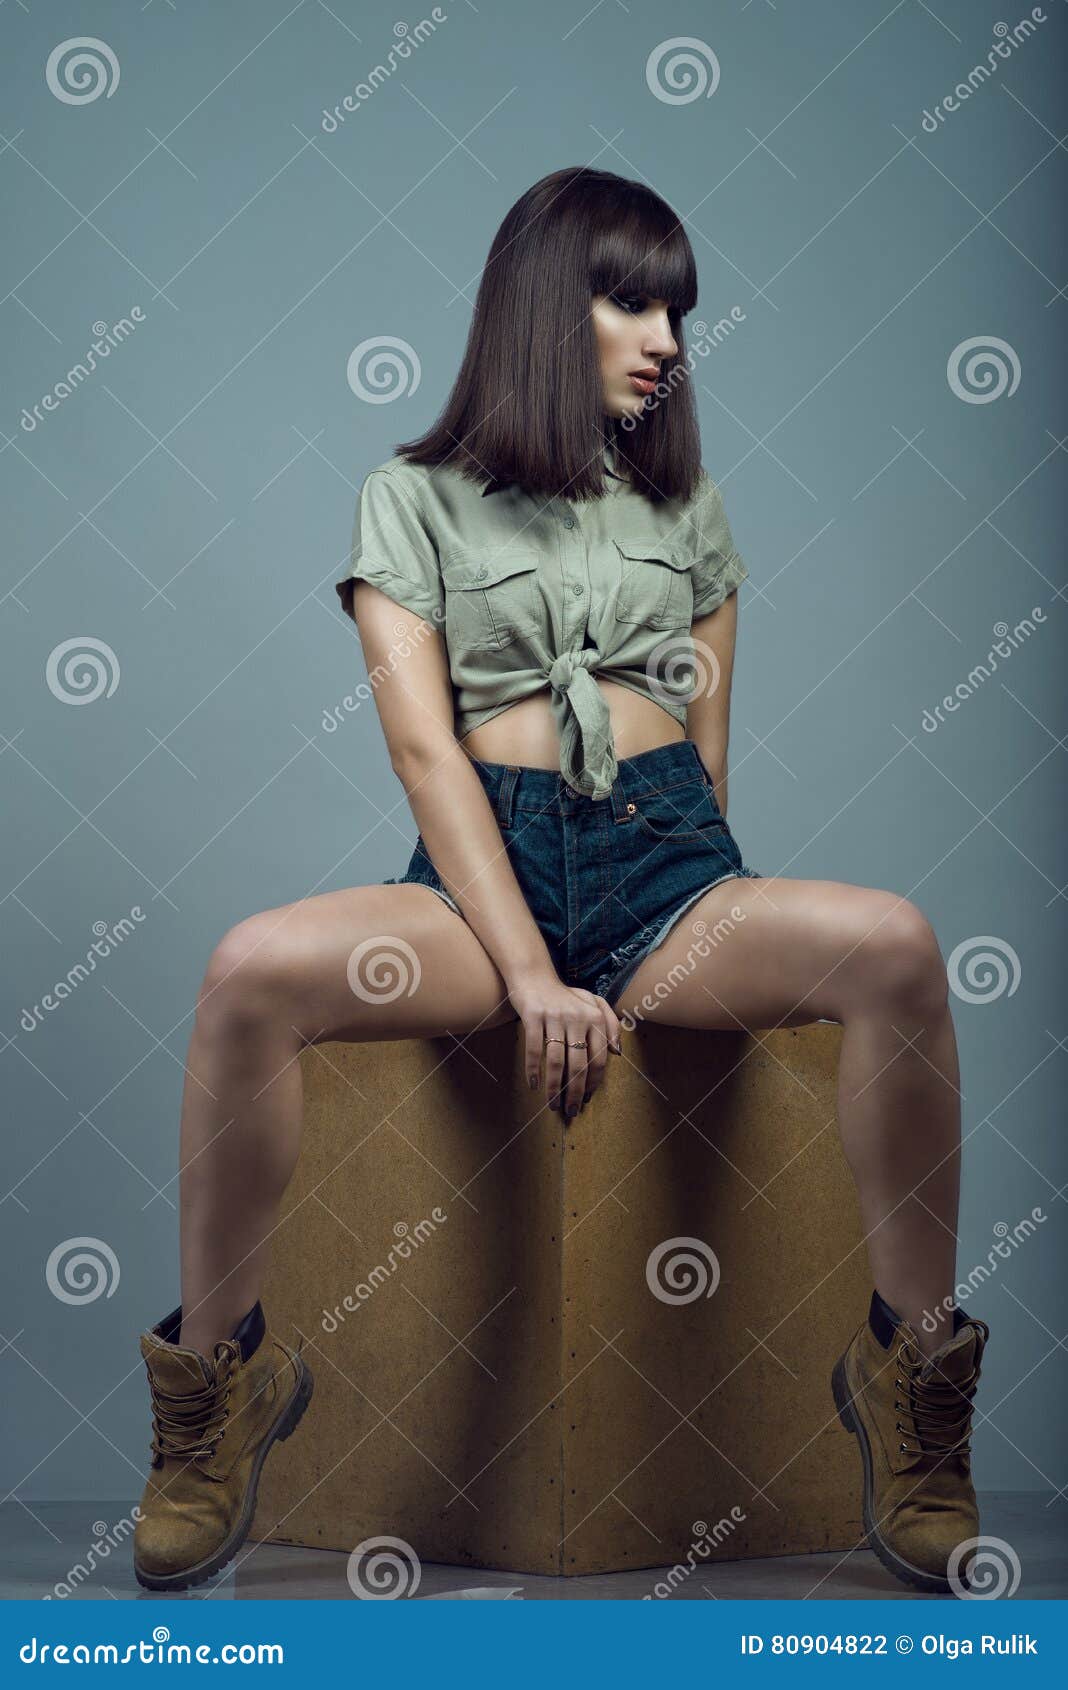 portrait of young gorgeous dark-haired model wearing high waisted dark blue jeans shorts, khaki shirt and boots sitting on cube